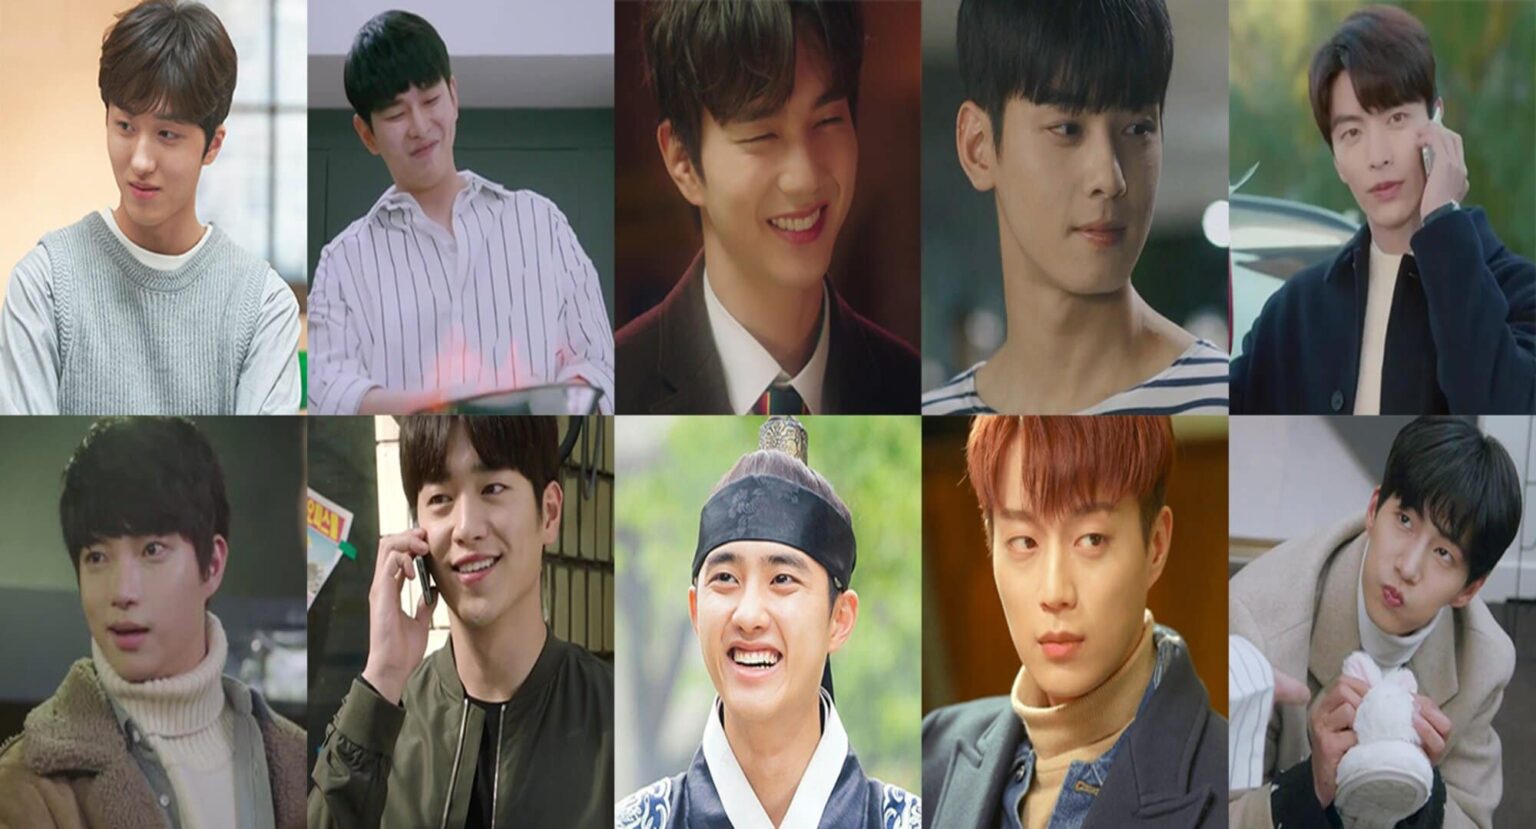 2019 & 2020 saw a surge in the number of people watching Korean dramas. Here's our thirsty black hole of shirtless Korean drama stars.